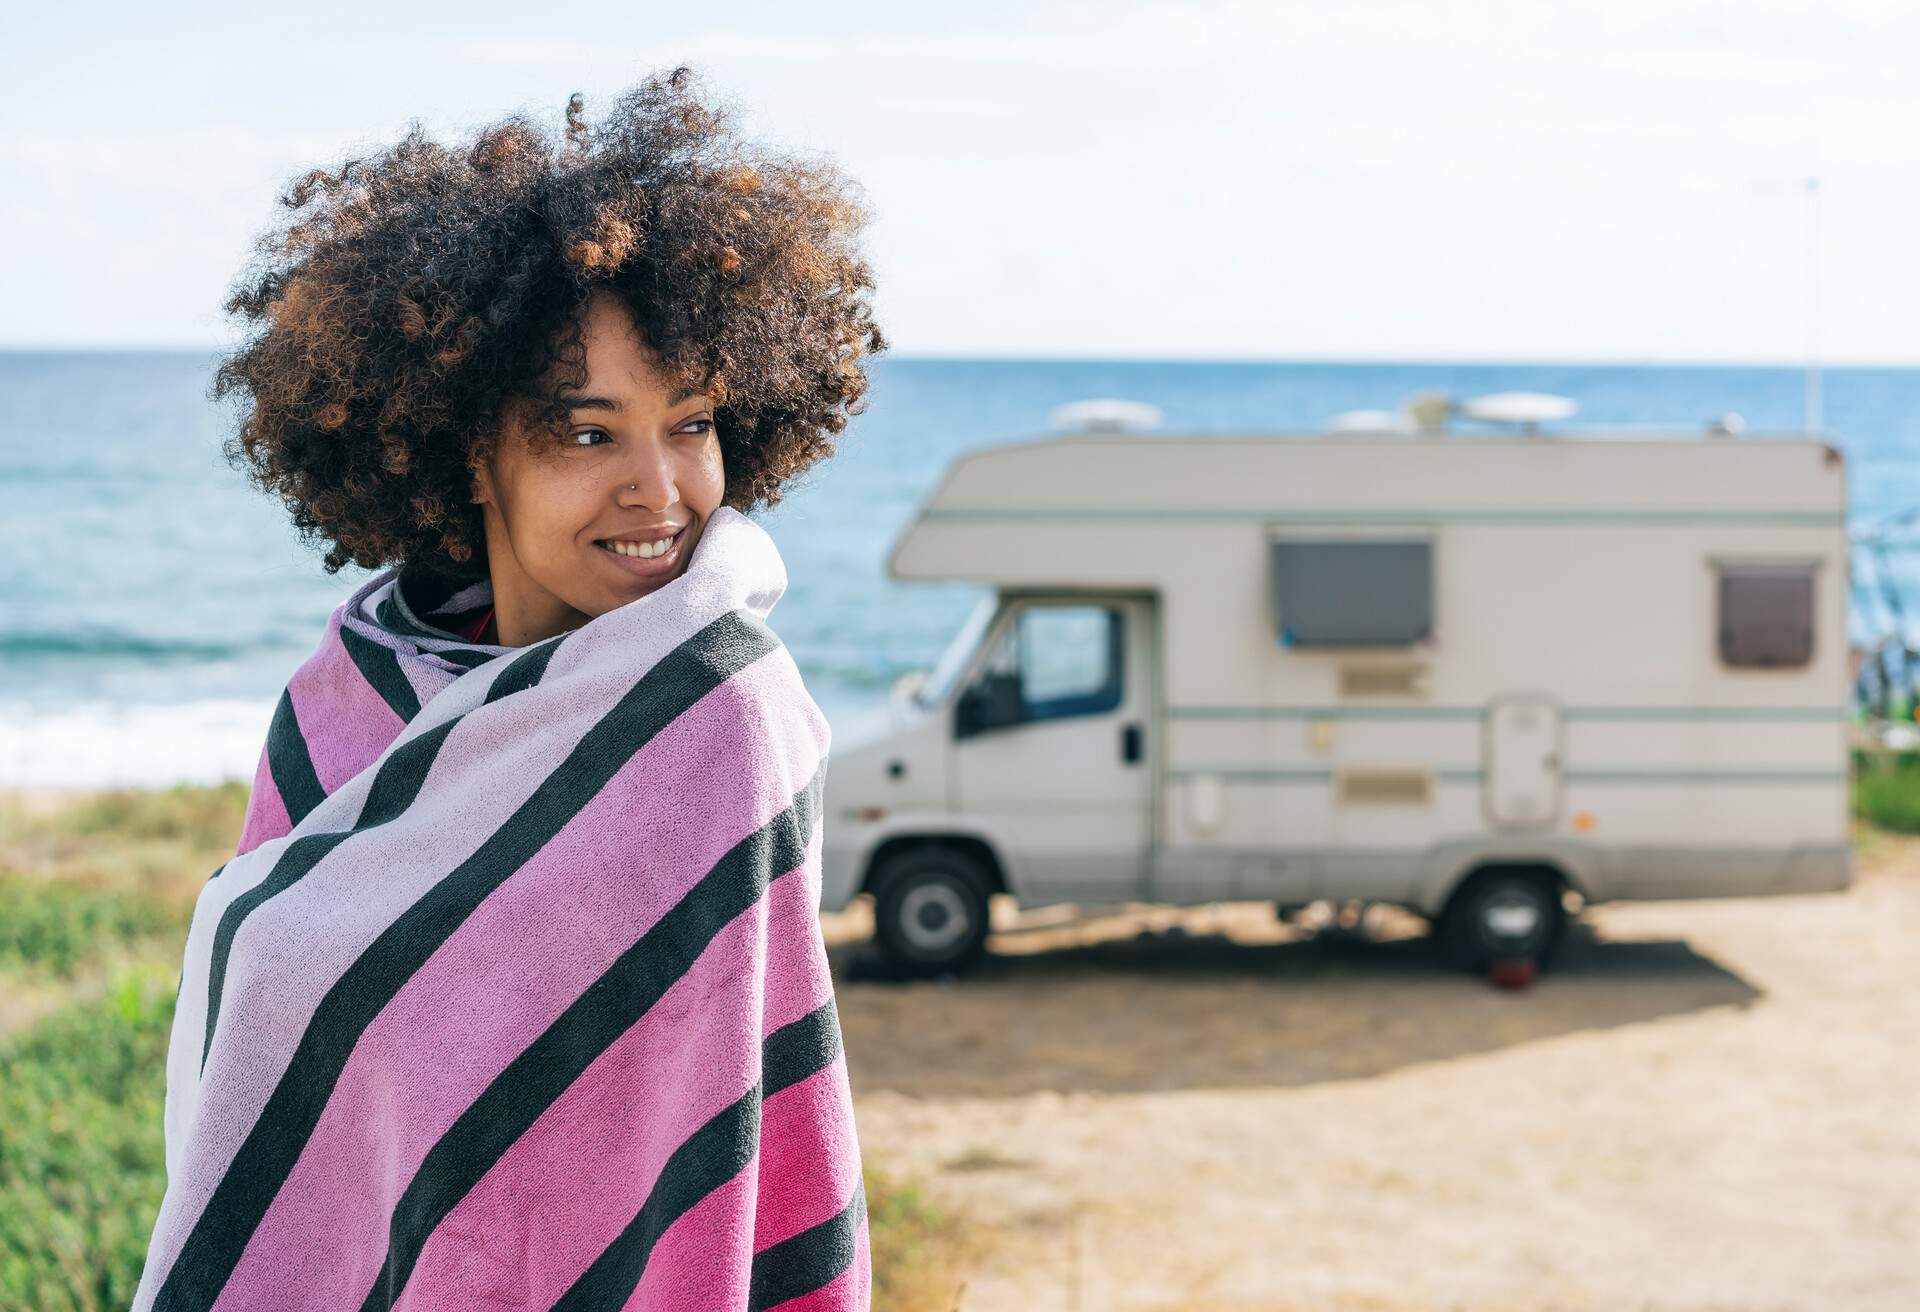 THEME_PEOPLE_WOMAN_CAMPING_CAMPERVAN_BEACH_SEA_GettyImages